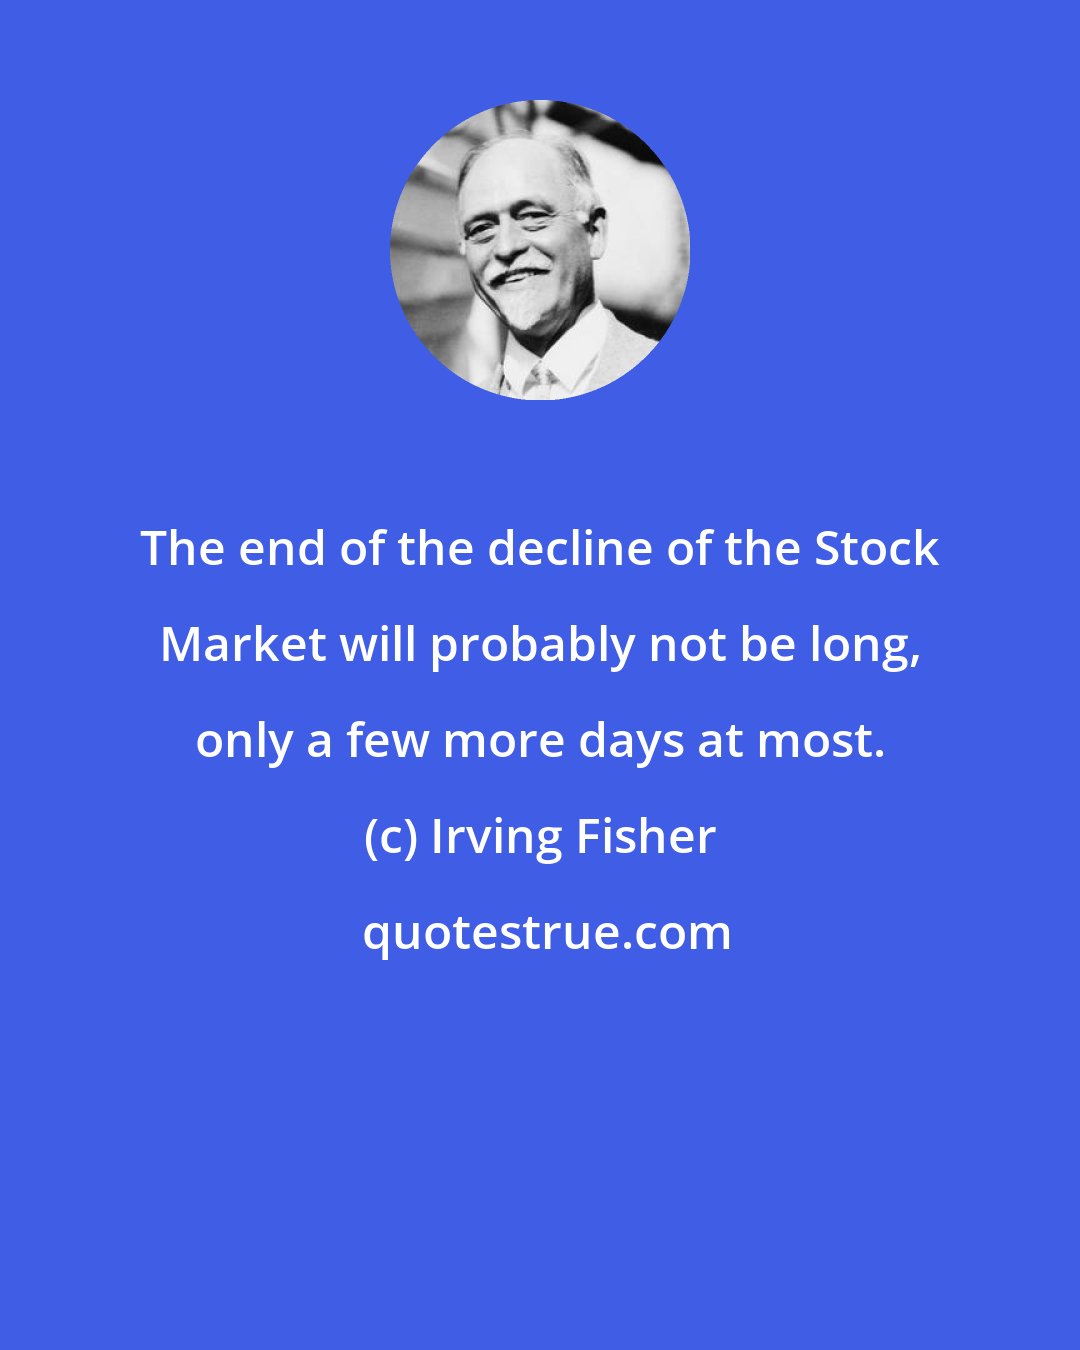 Irving Fisher: The end of the decline of the Stock Market will probably not be long, only a few more days at most.